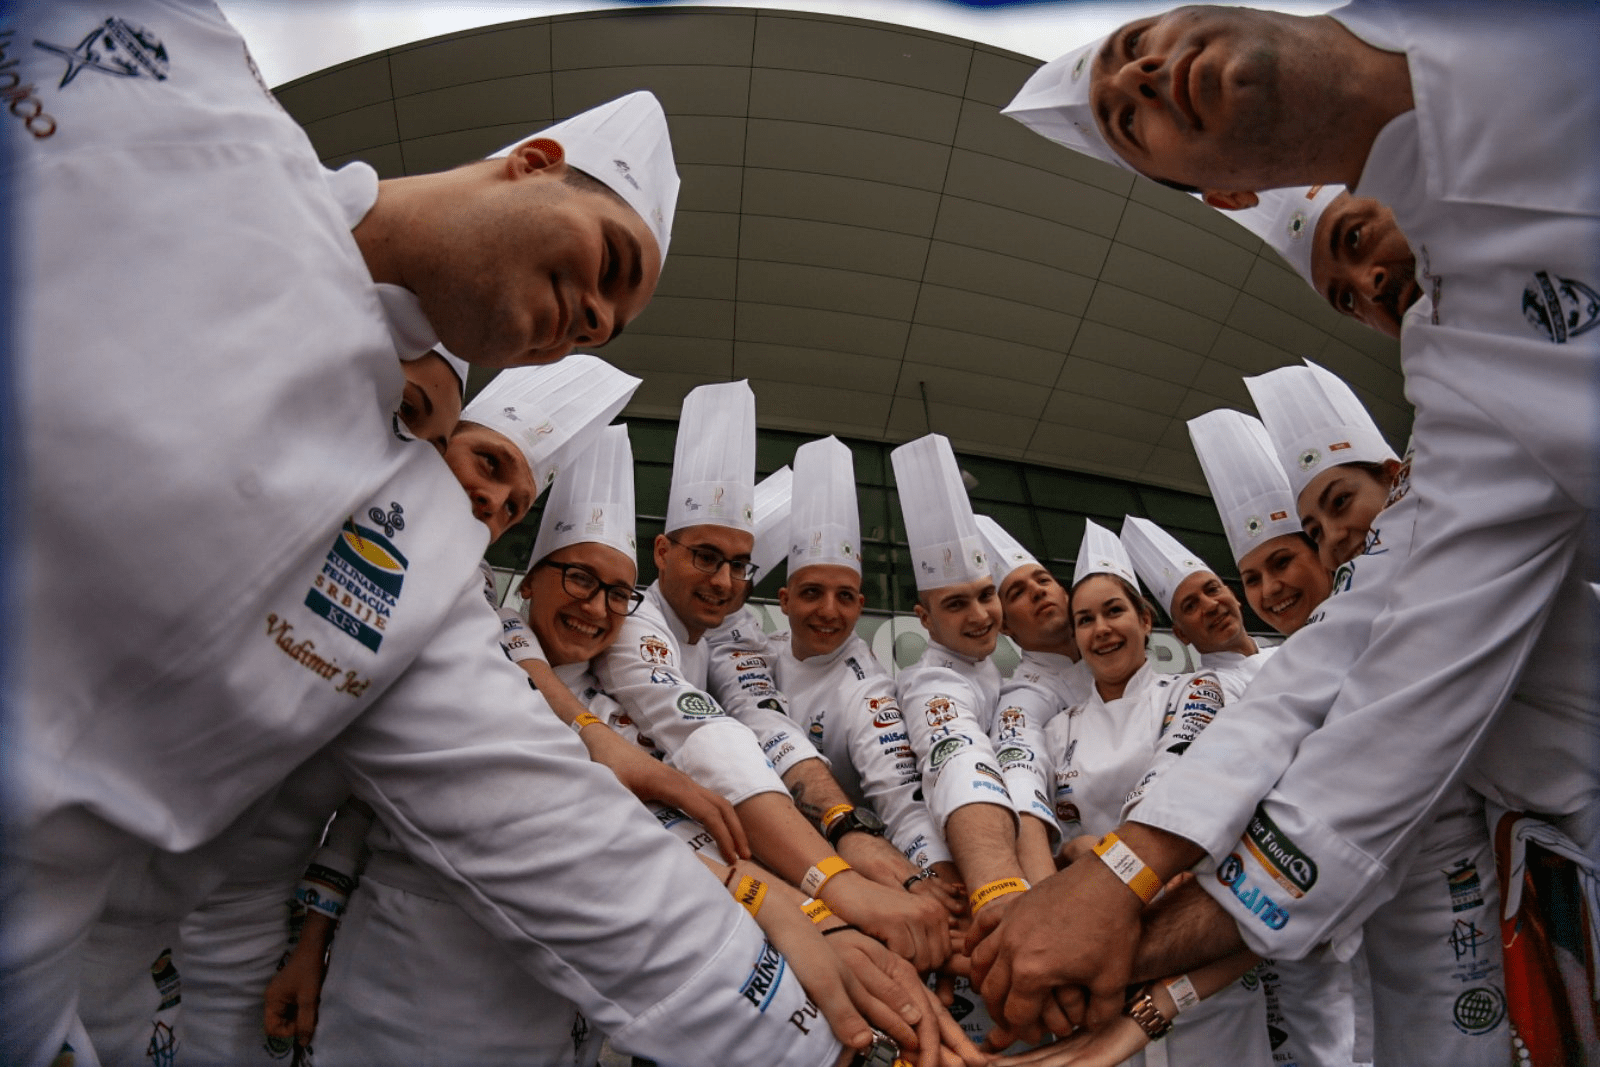 Three Students of Gastronomy from the Faculty of Sciences won the Bronze Medal as Members of the Serbian National Team at the Culinary Olympics in Stuttgart